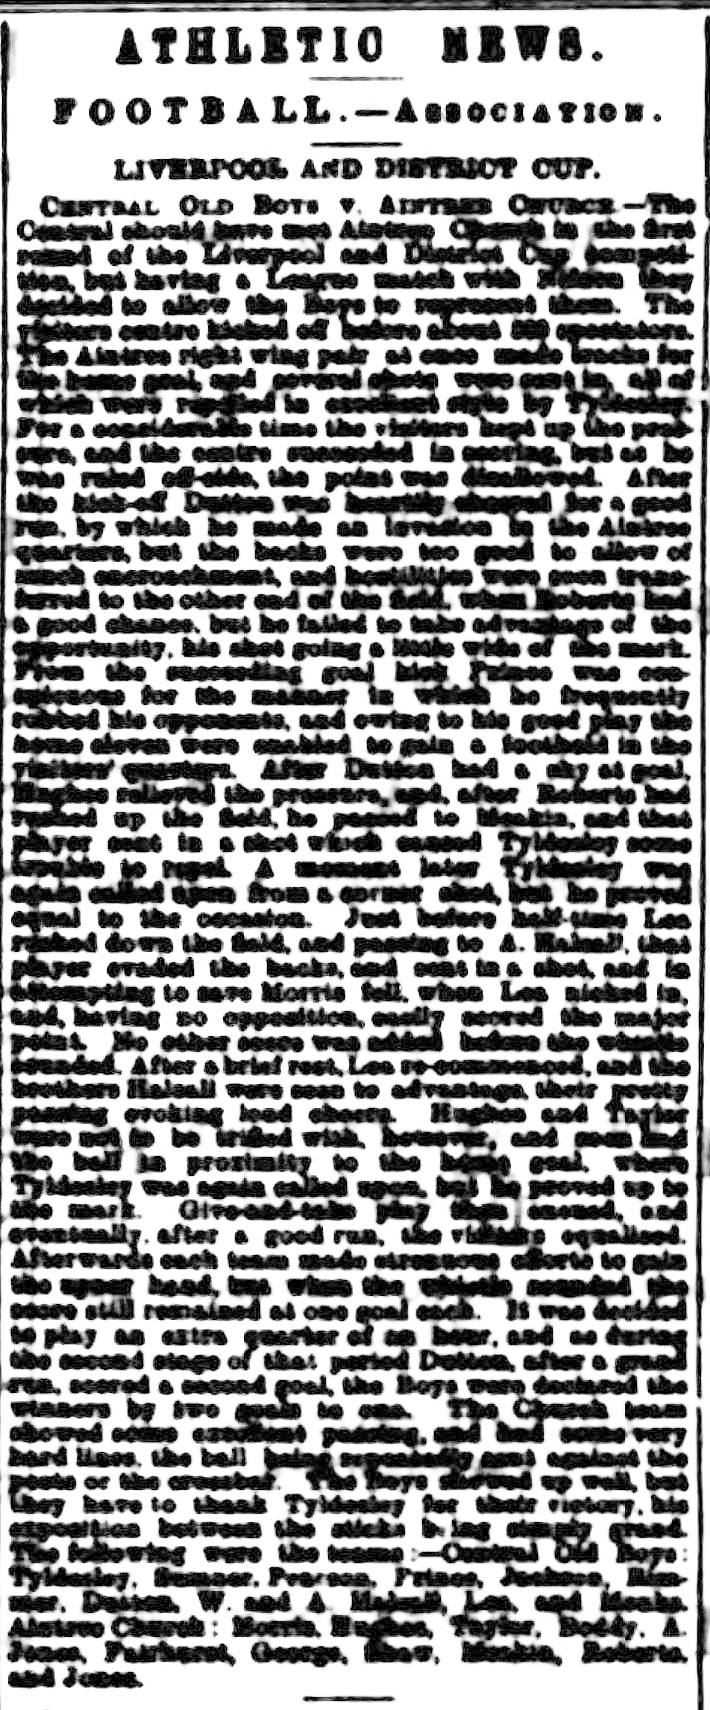 Southport Visiter - Tuesday 08 October 1889
Image © THE BRITISH LIBRARY BOARD. ALL RIGHTS RESERVED.
